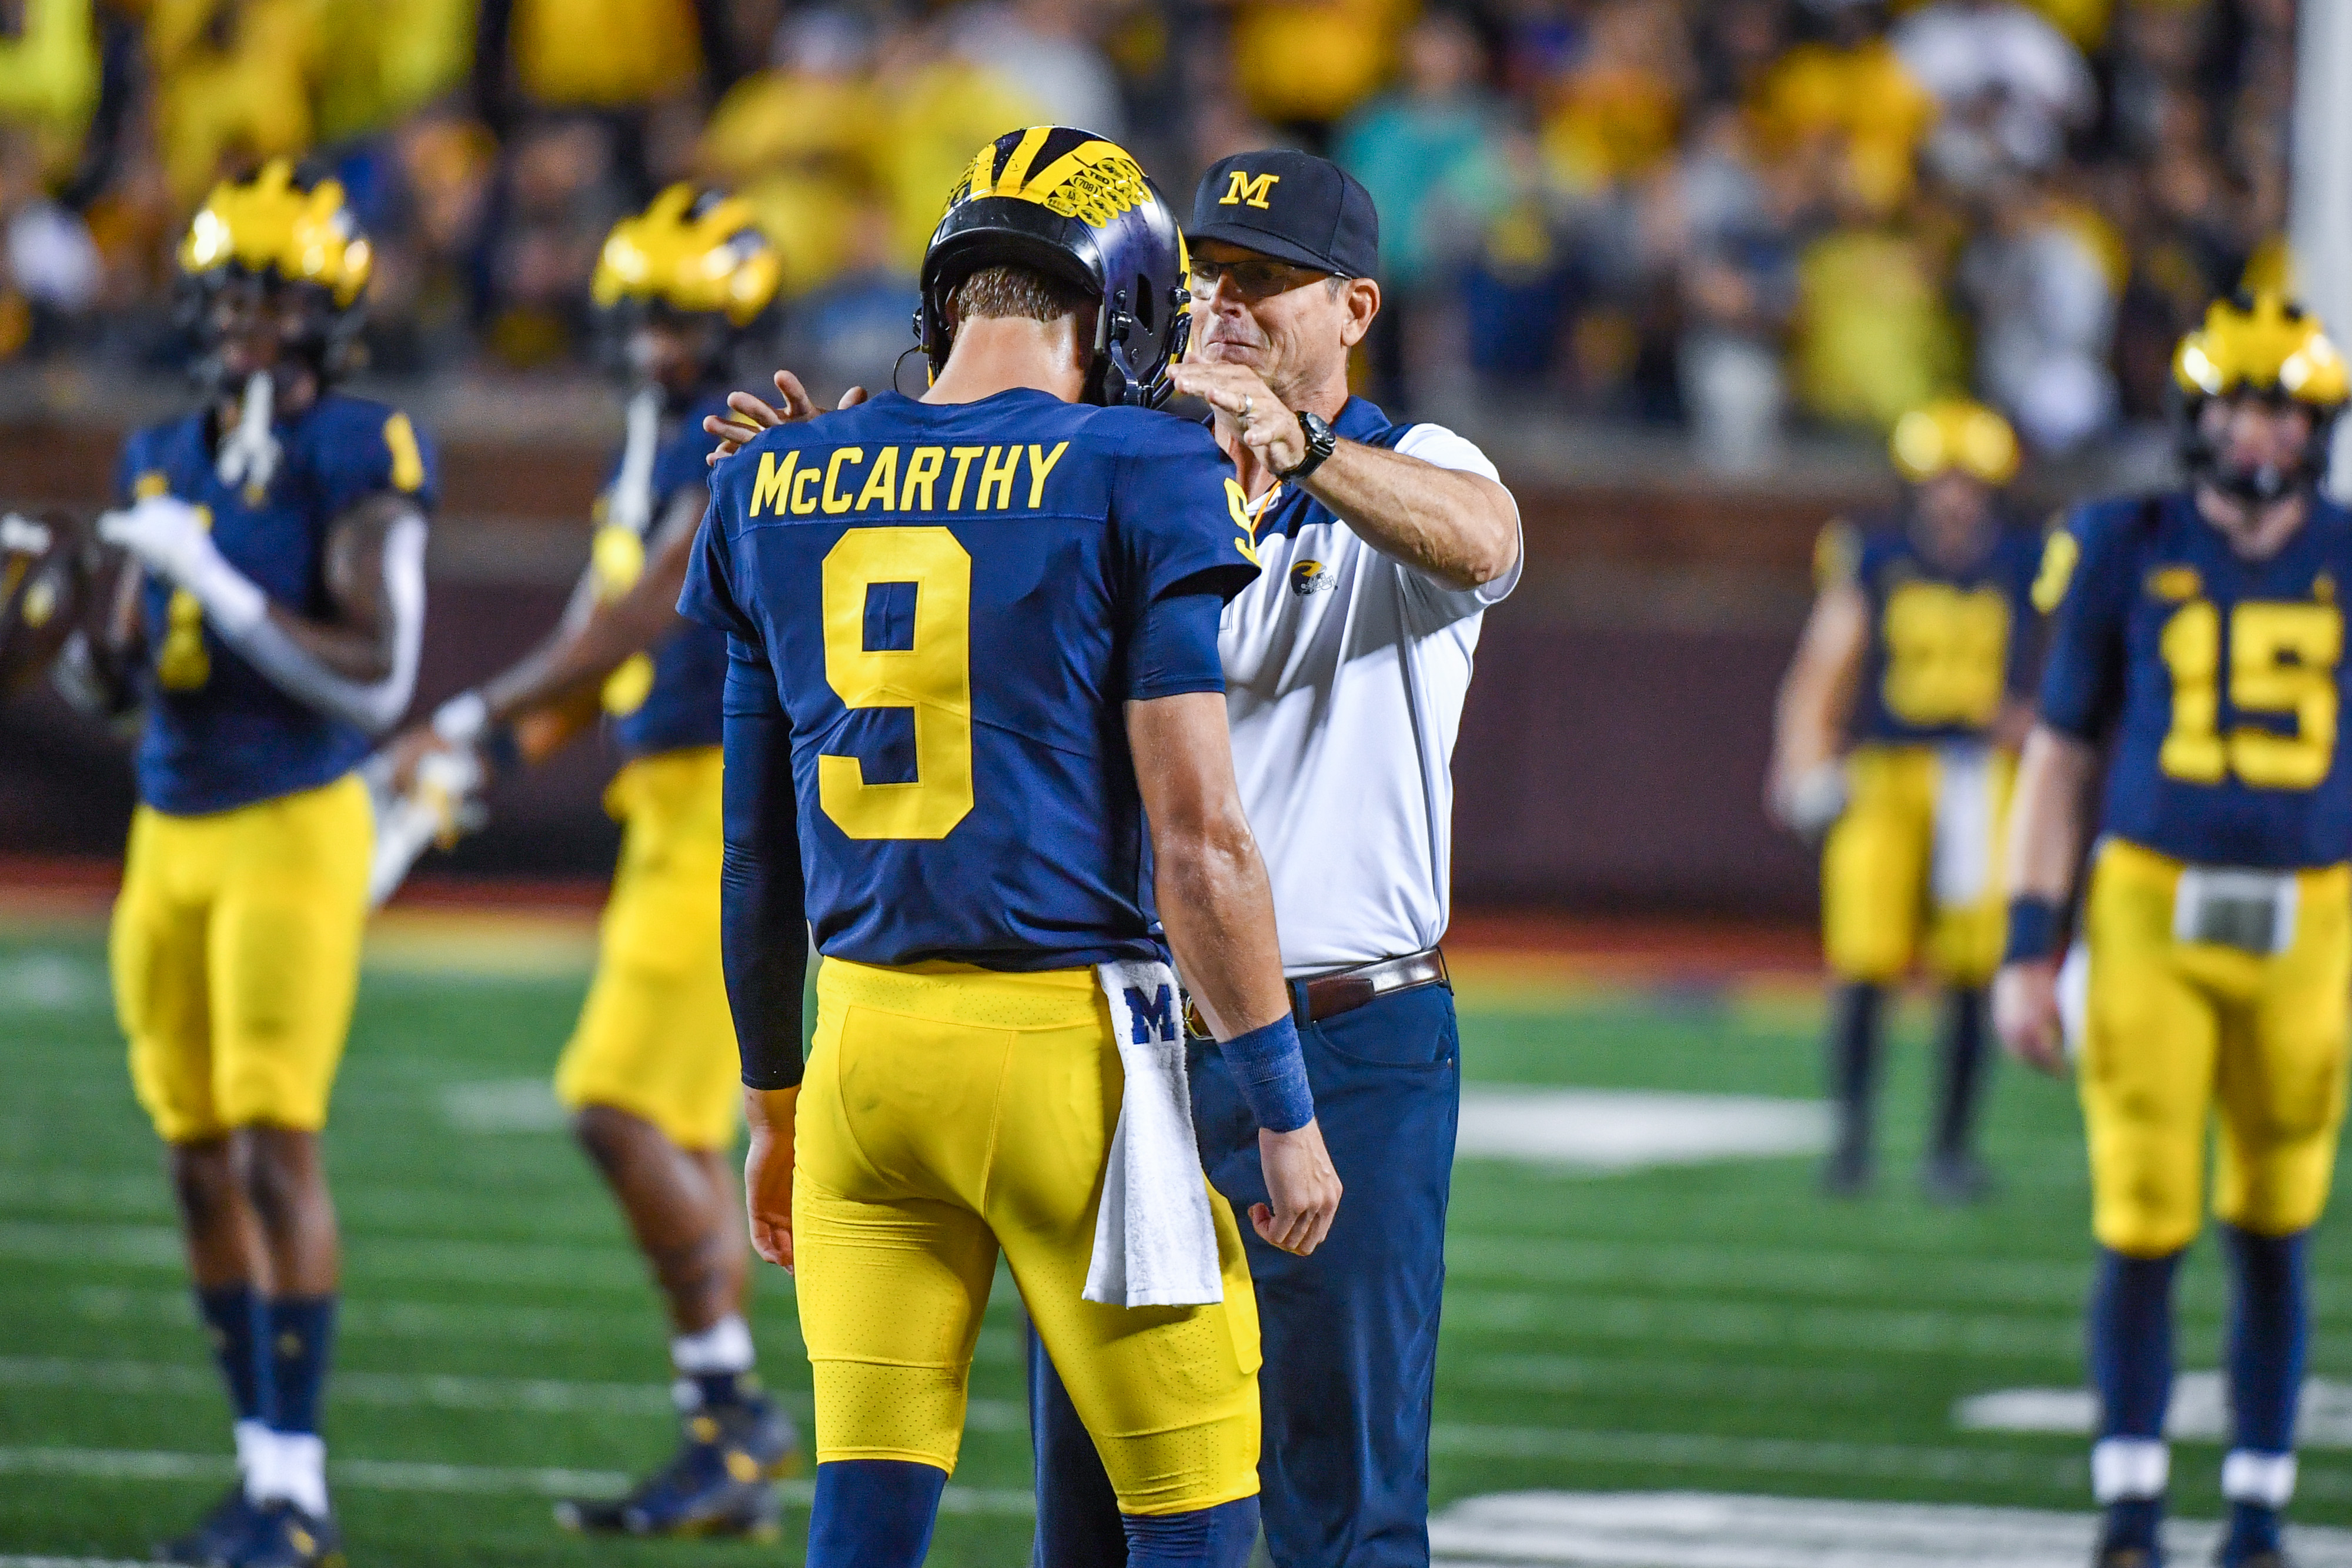 AUDIO: Does the U of M care about Football Expectations?